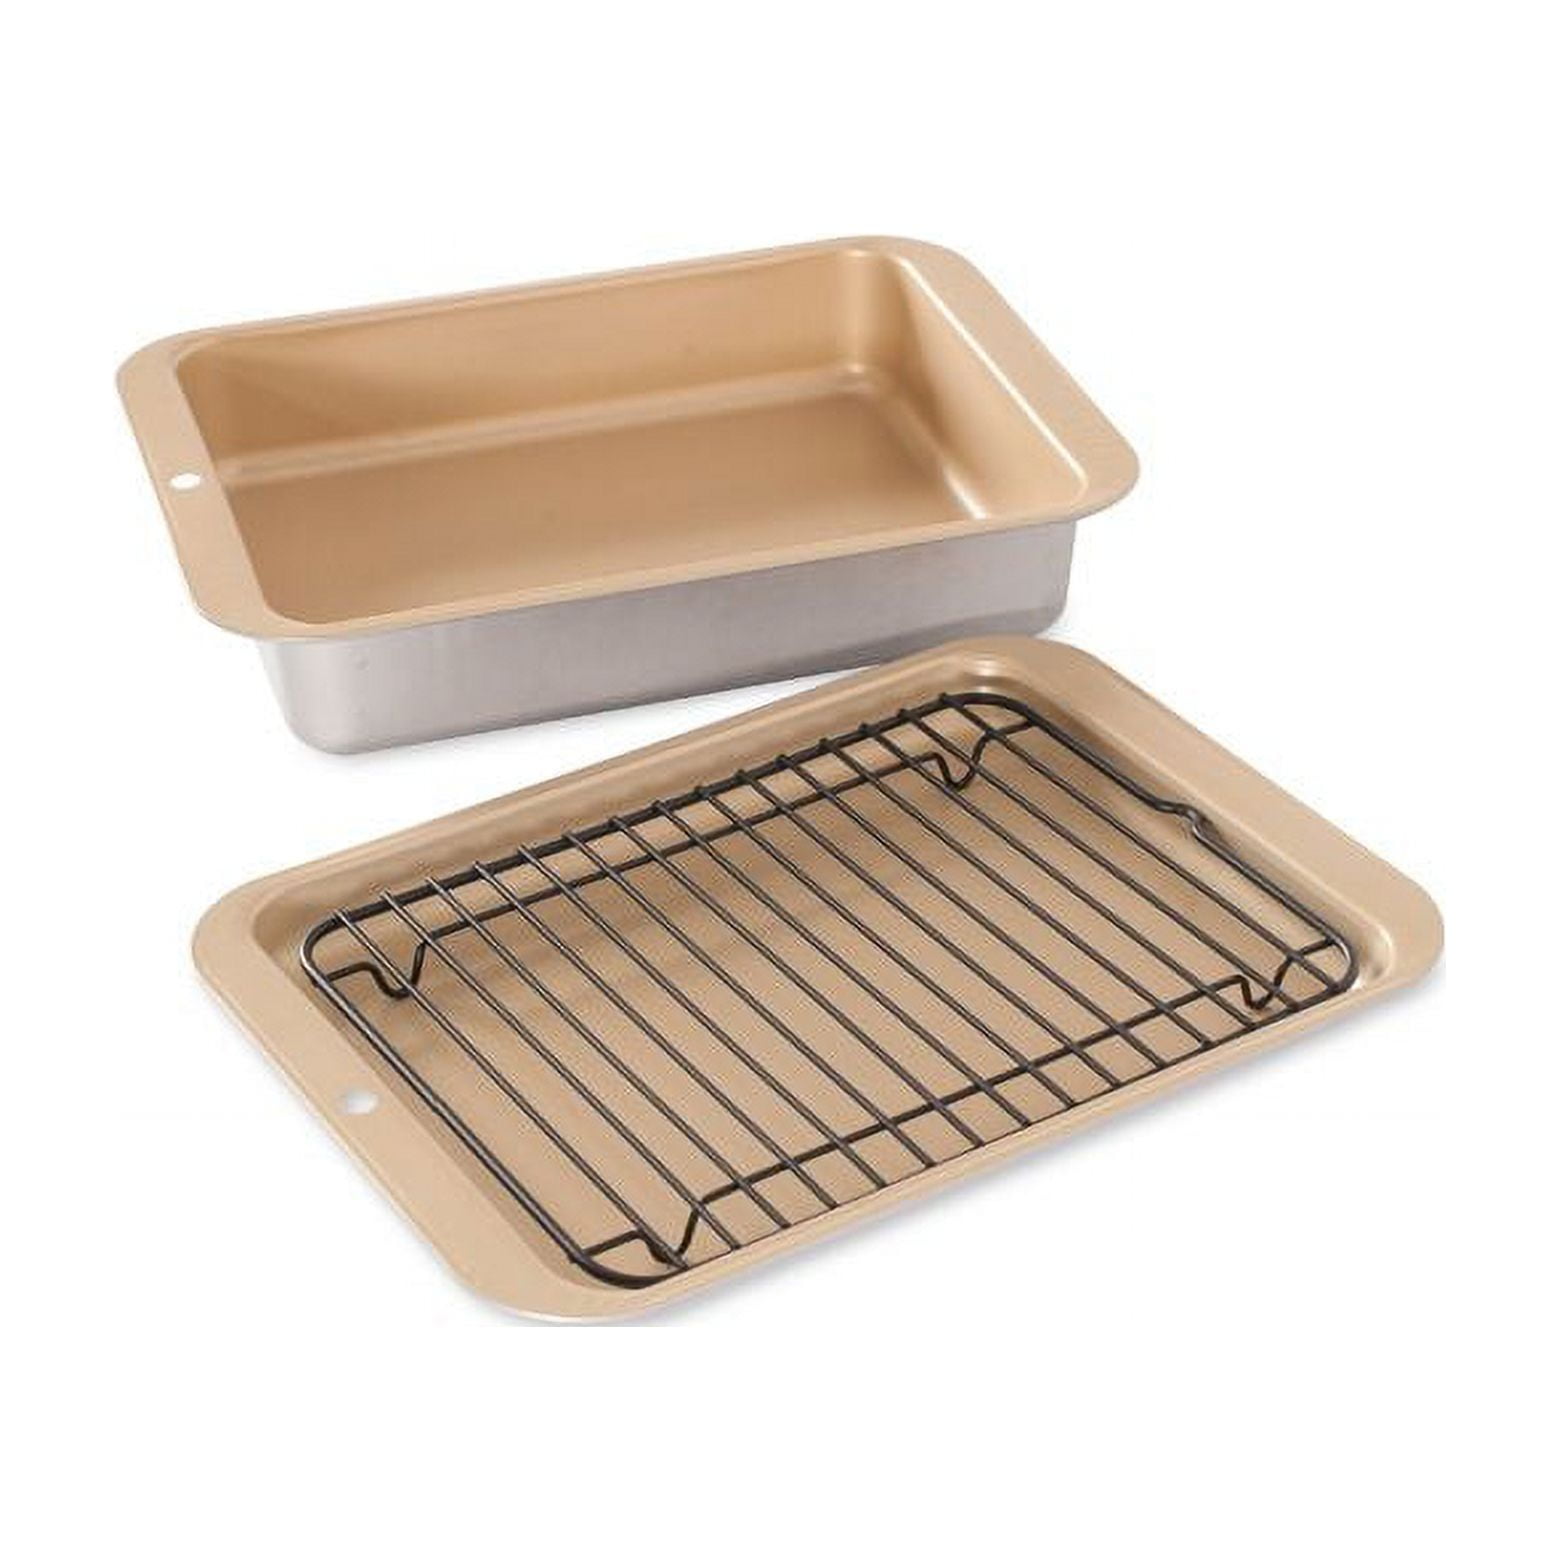 Nordic Ware® Compact Oven Baking Sheet, 1 ct - Food 4 Less